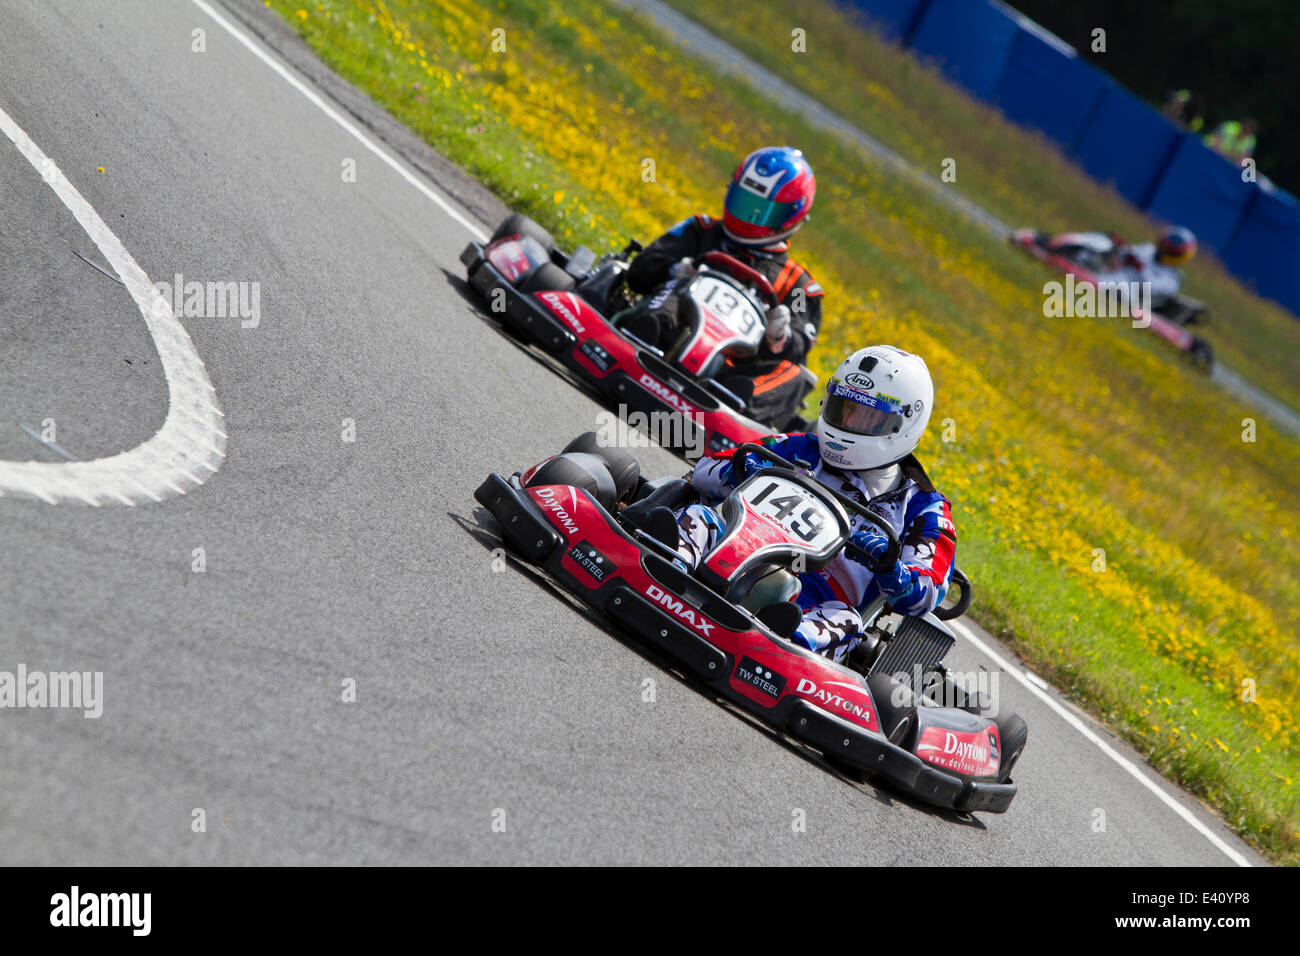 Go-Karting at the Mercedes-Benz World at the famous Brooklands circuit in Surrey, raising money for the Henry Surtees Foundation. Brooklands 01.07.2014 Theodore Liasi/Alamy Live News Stock Photo